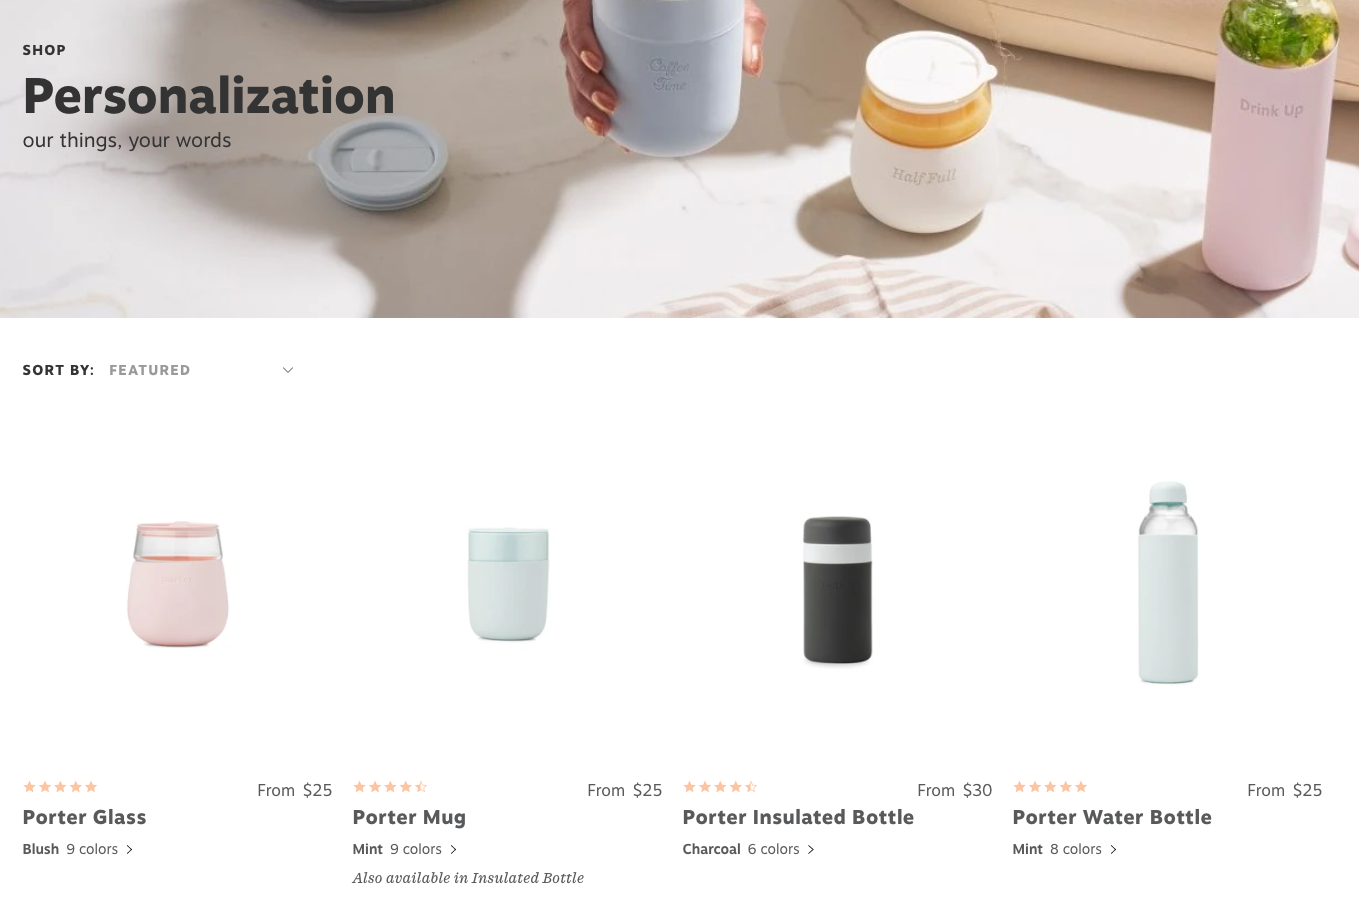 The personalization section of the W&P website.